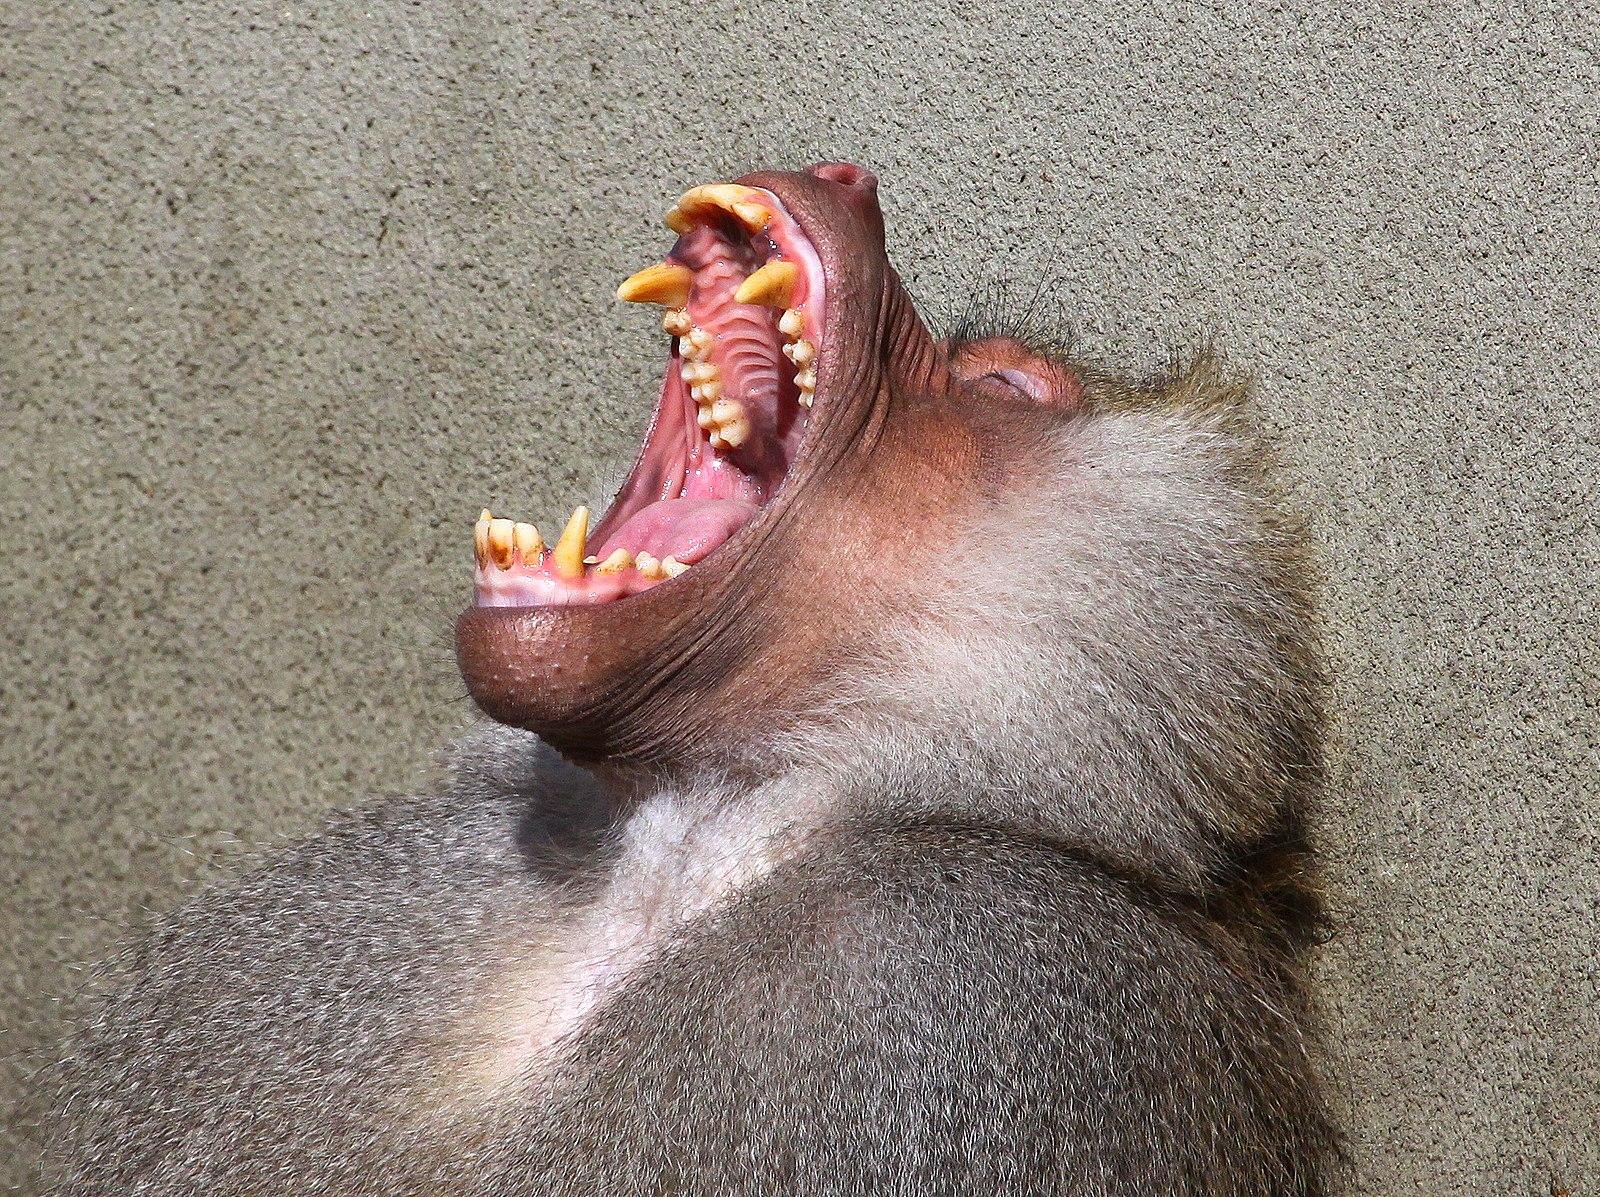 why do apes have canine teeth